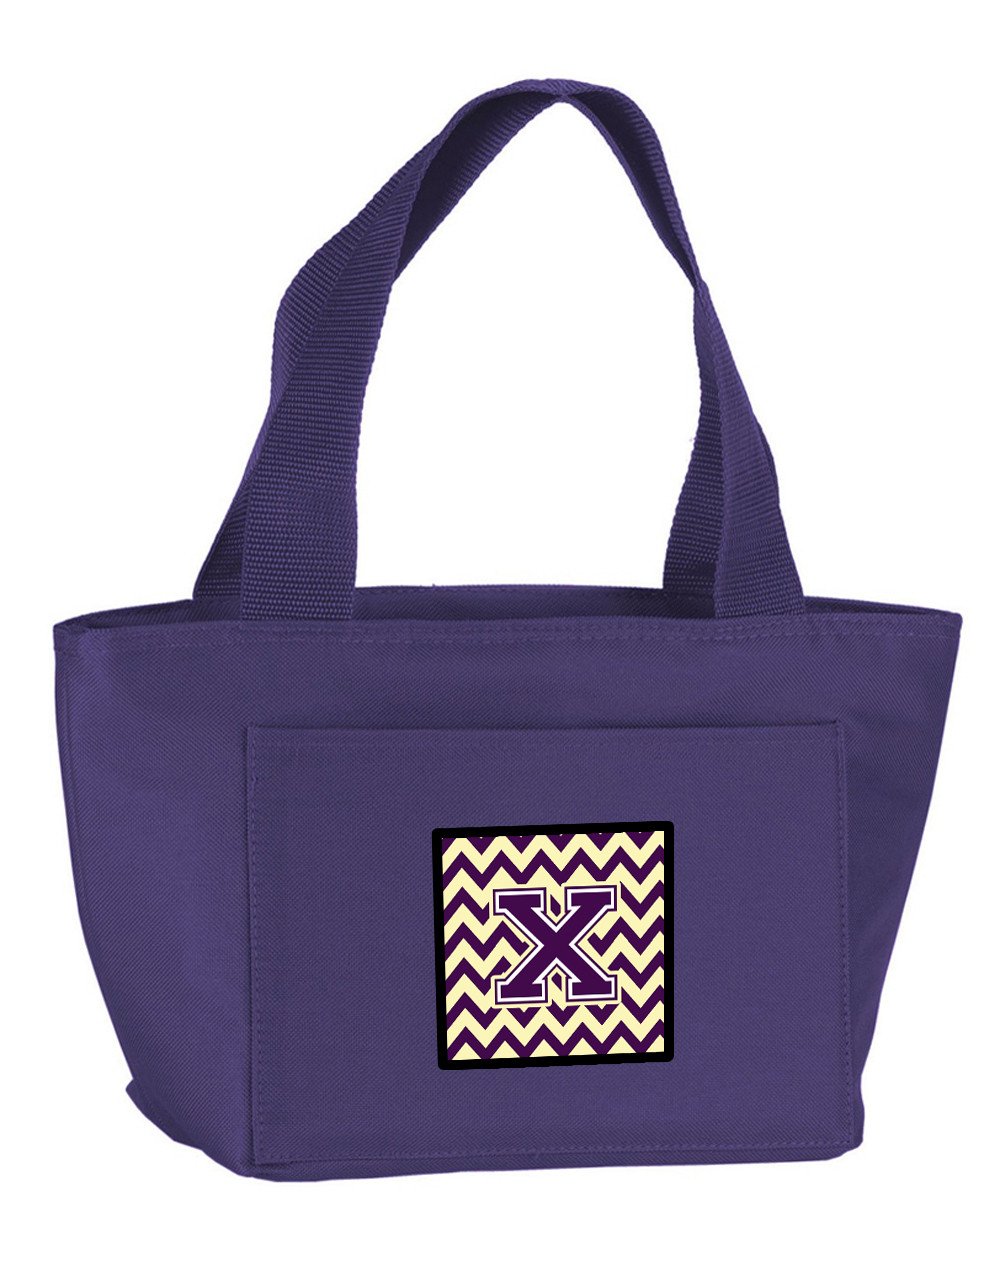 Letter X Chevron Purple and Gold Lunch Bag CJ1058-XPR-8808 by Caroline's Treasures